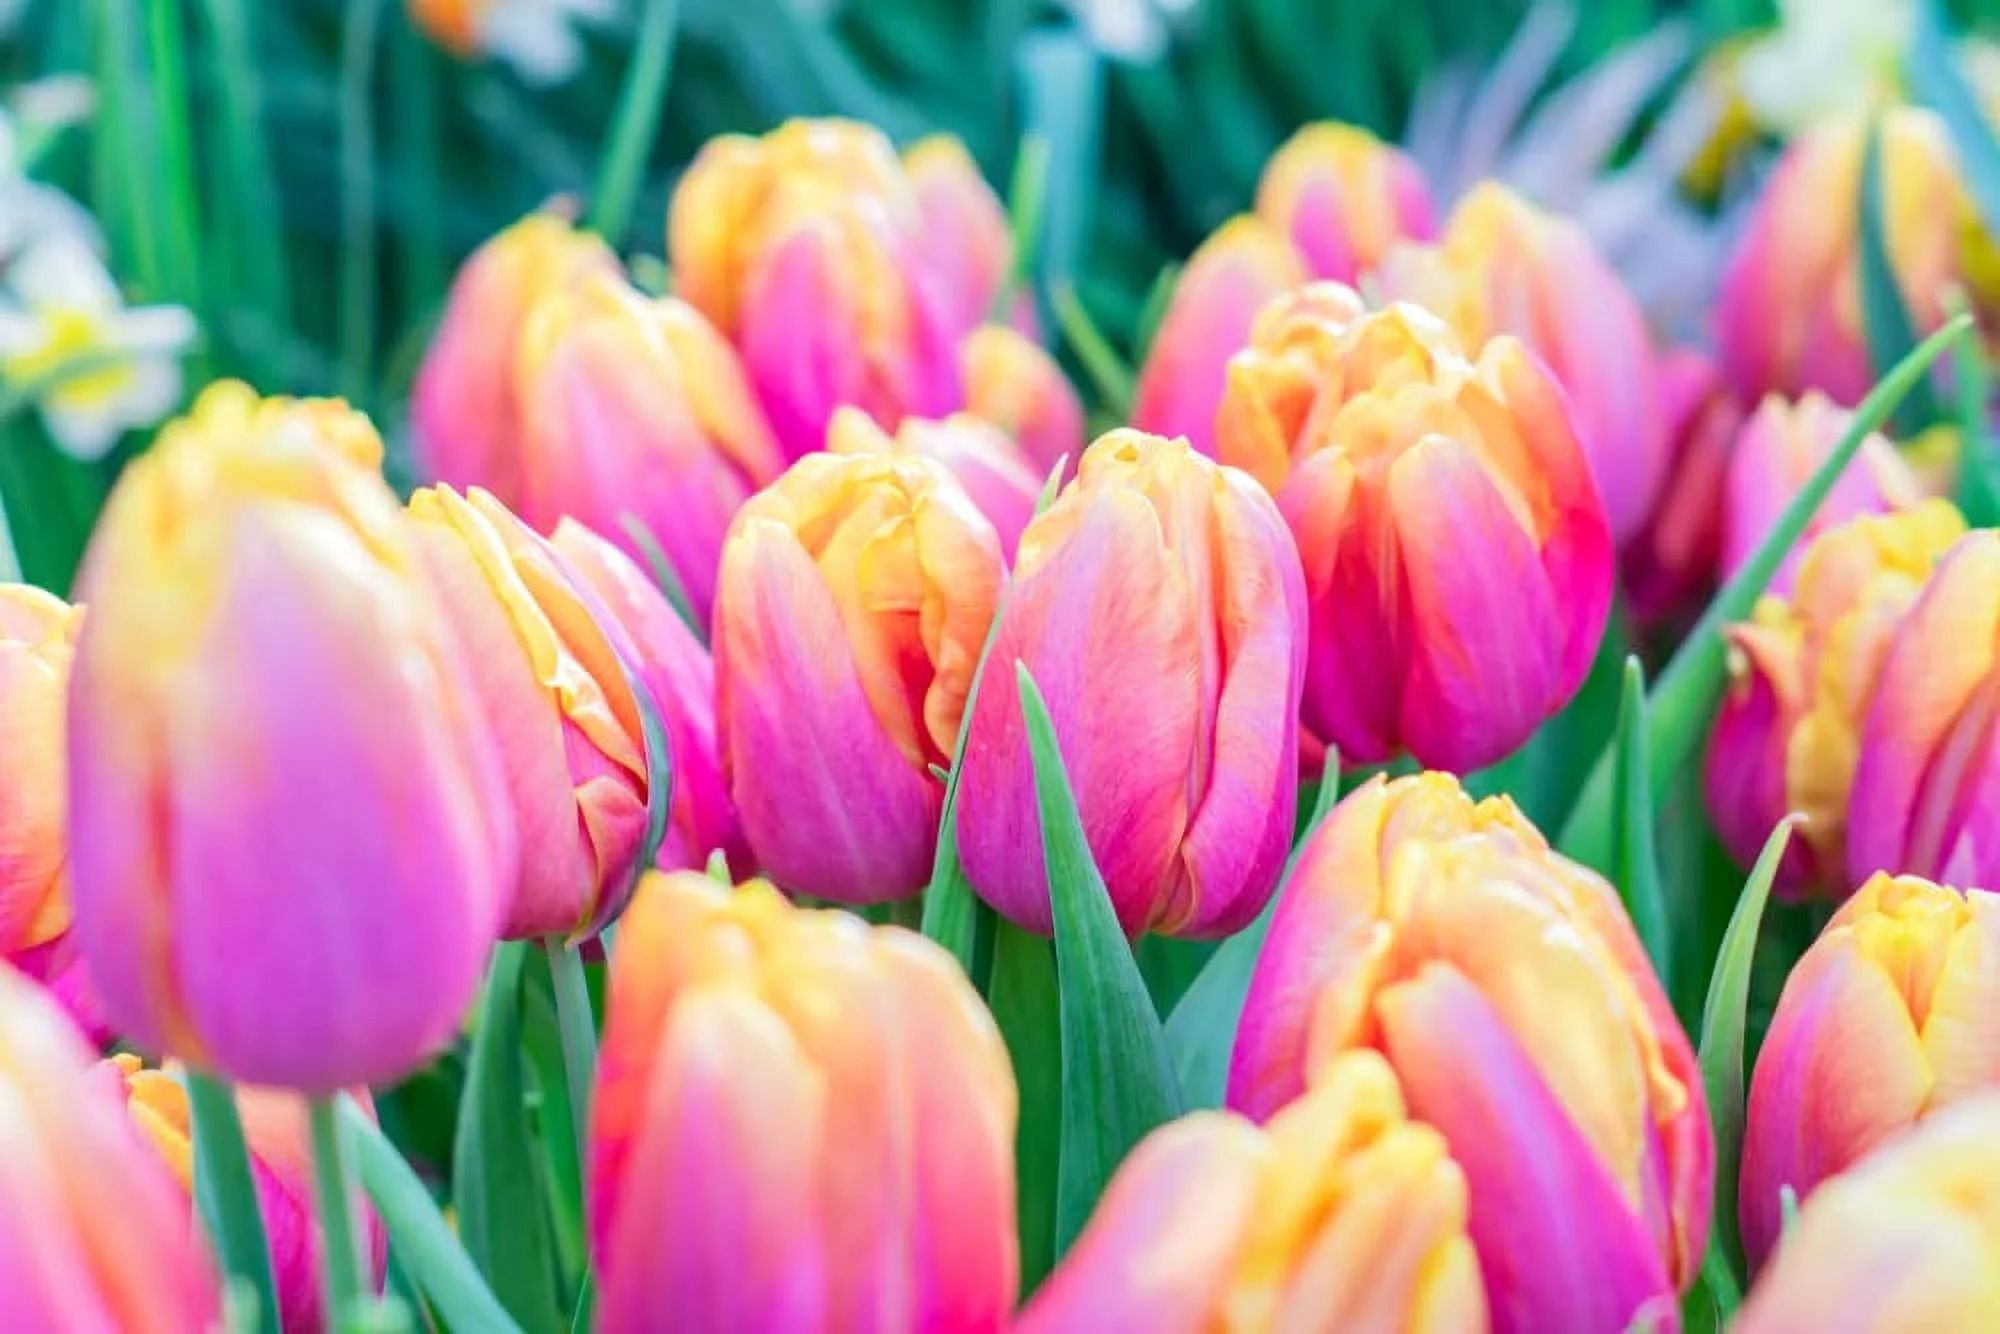 10 Pink Passion Tulip Bulbs for Planting - Easy to Grow - Made in USA, Ships from Iowa | Walmart (US)